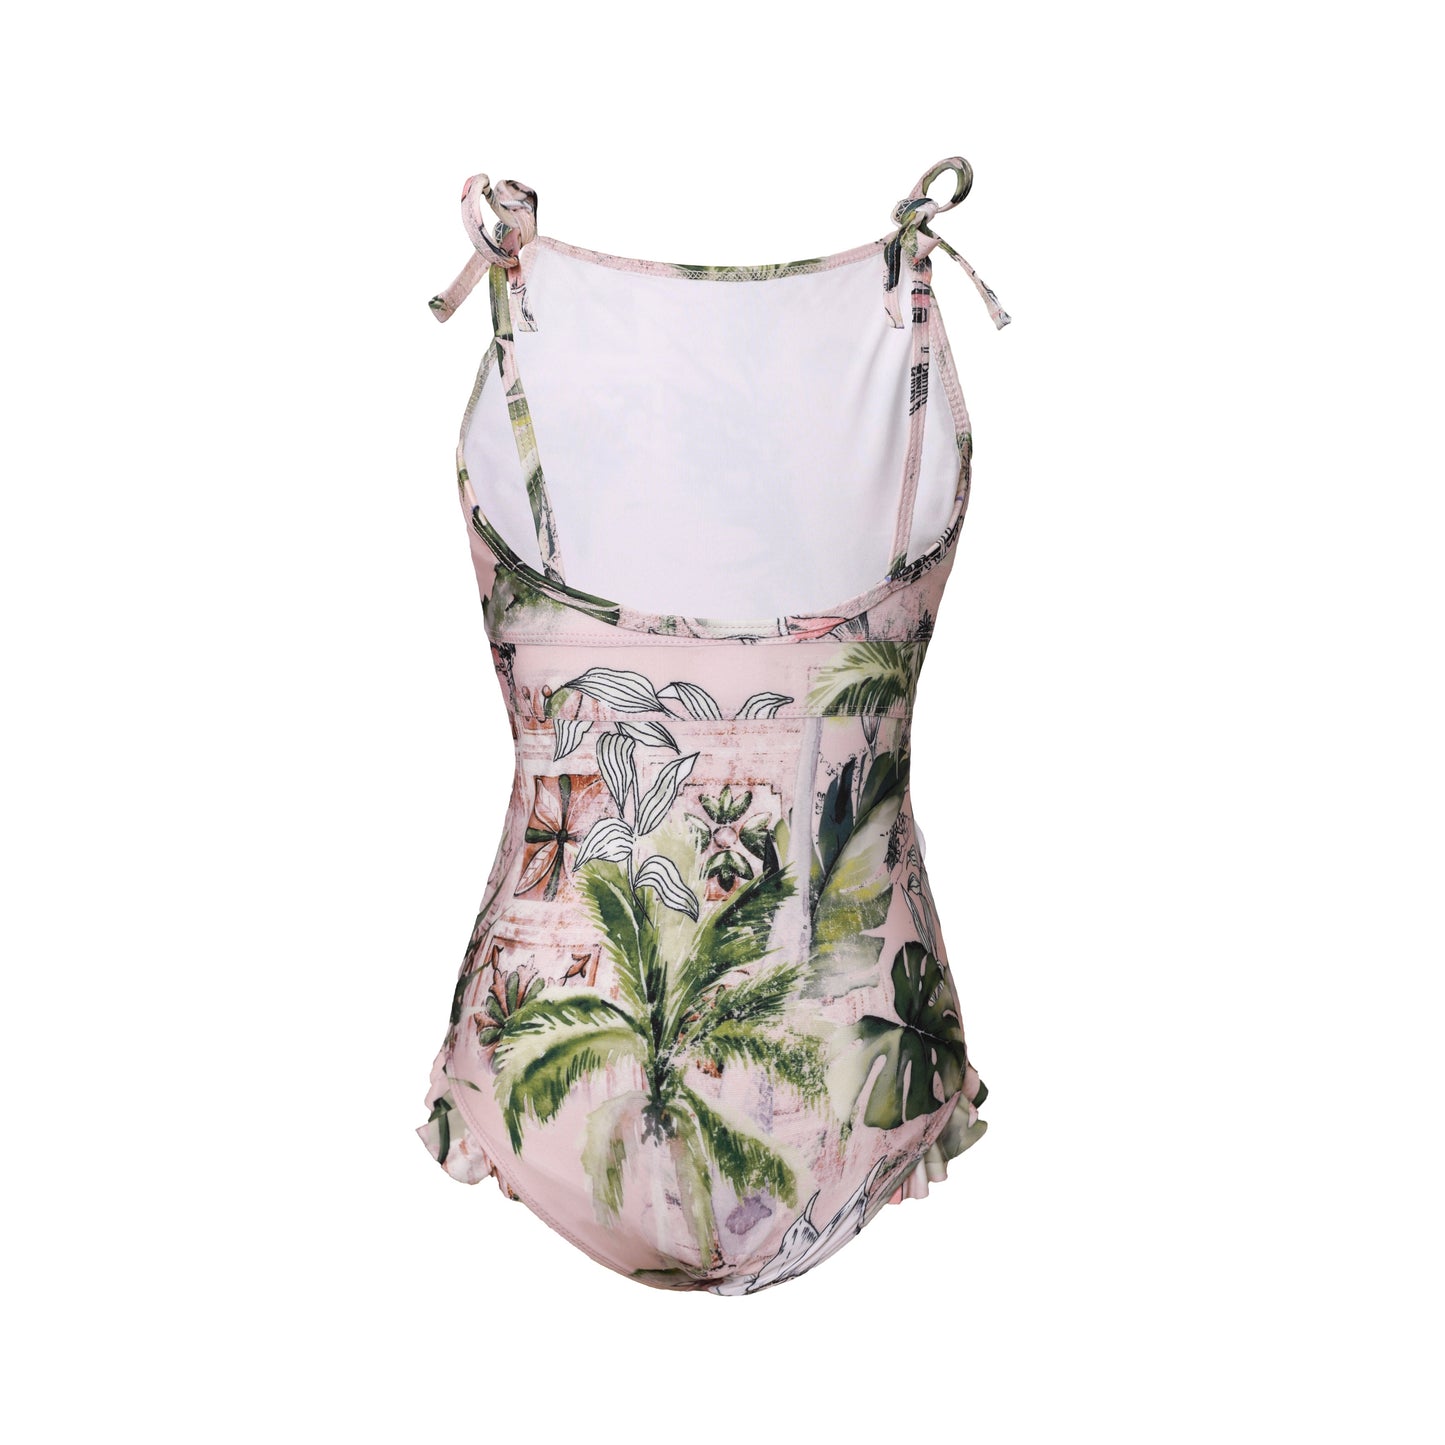 Girls Selo Singlet Style One piece swimsuit with tie up shoulders by Plivati Swimwear Children's collection